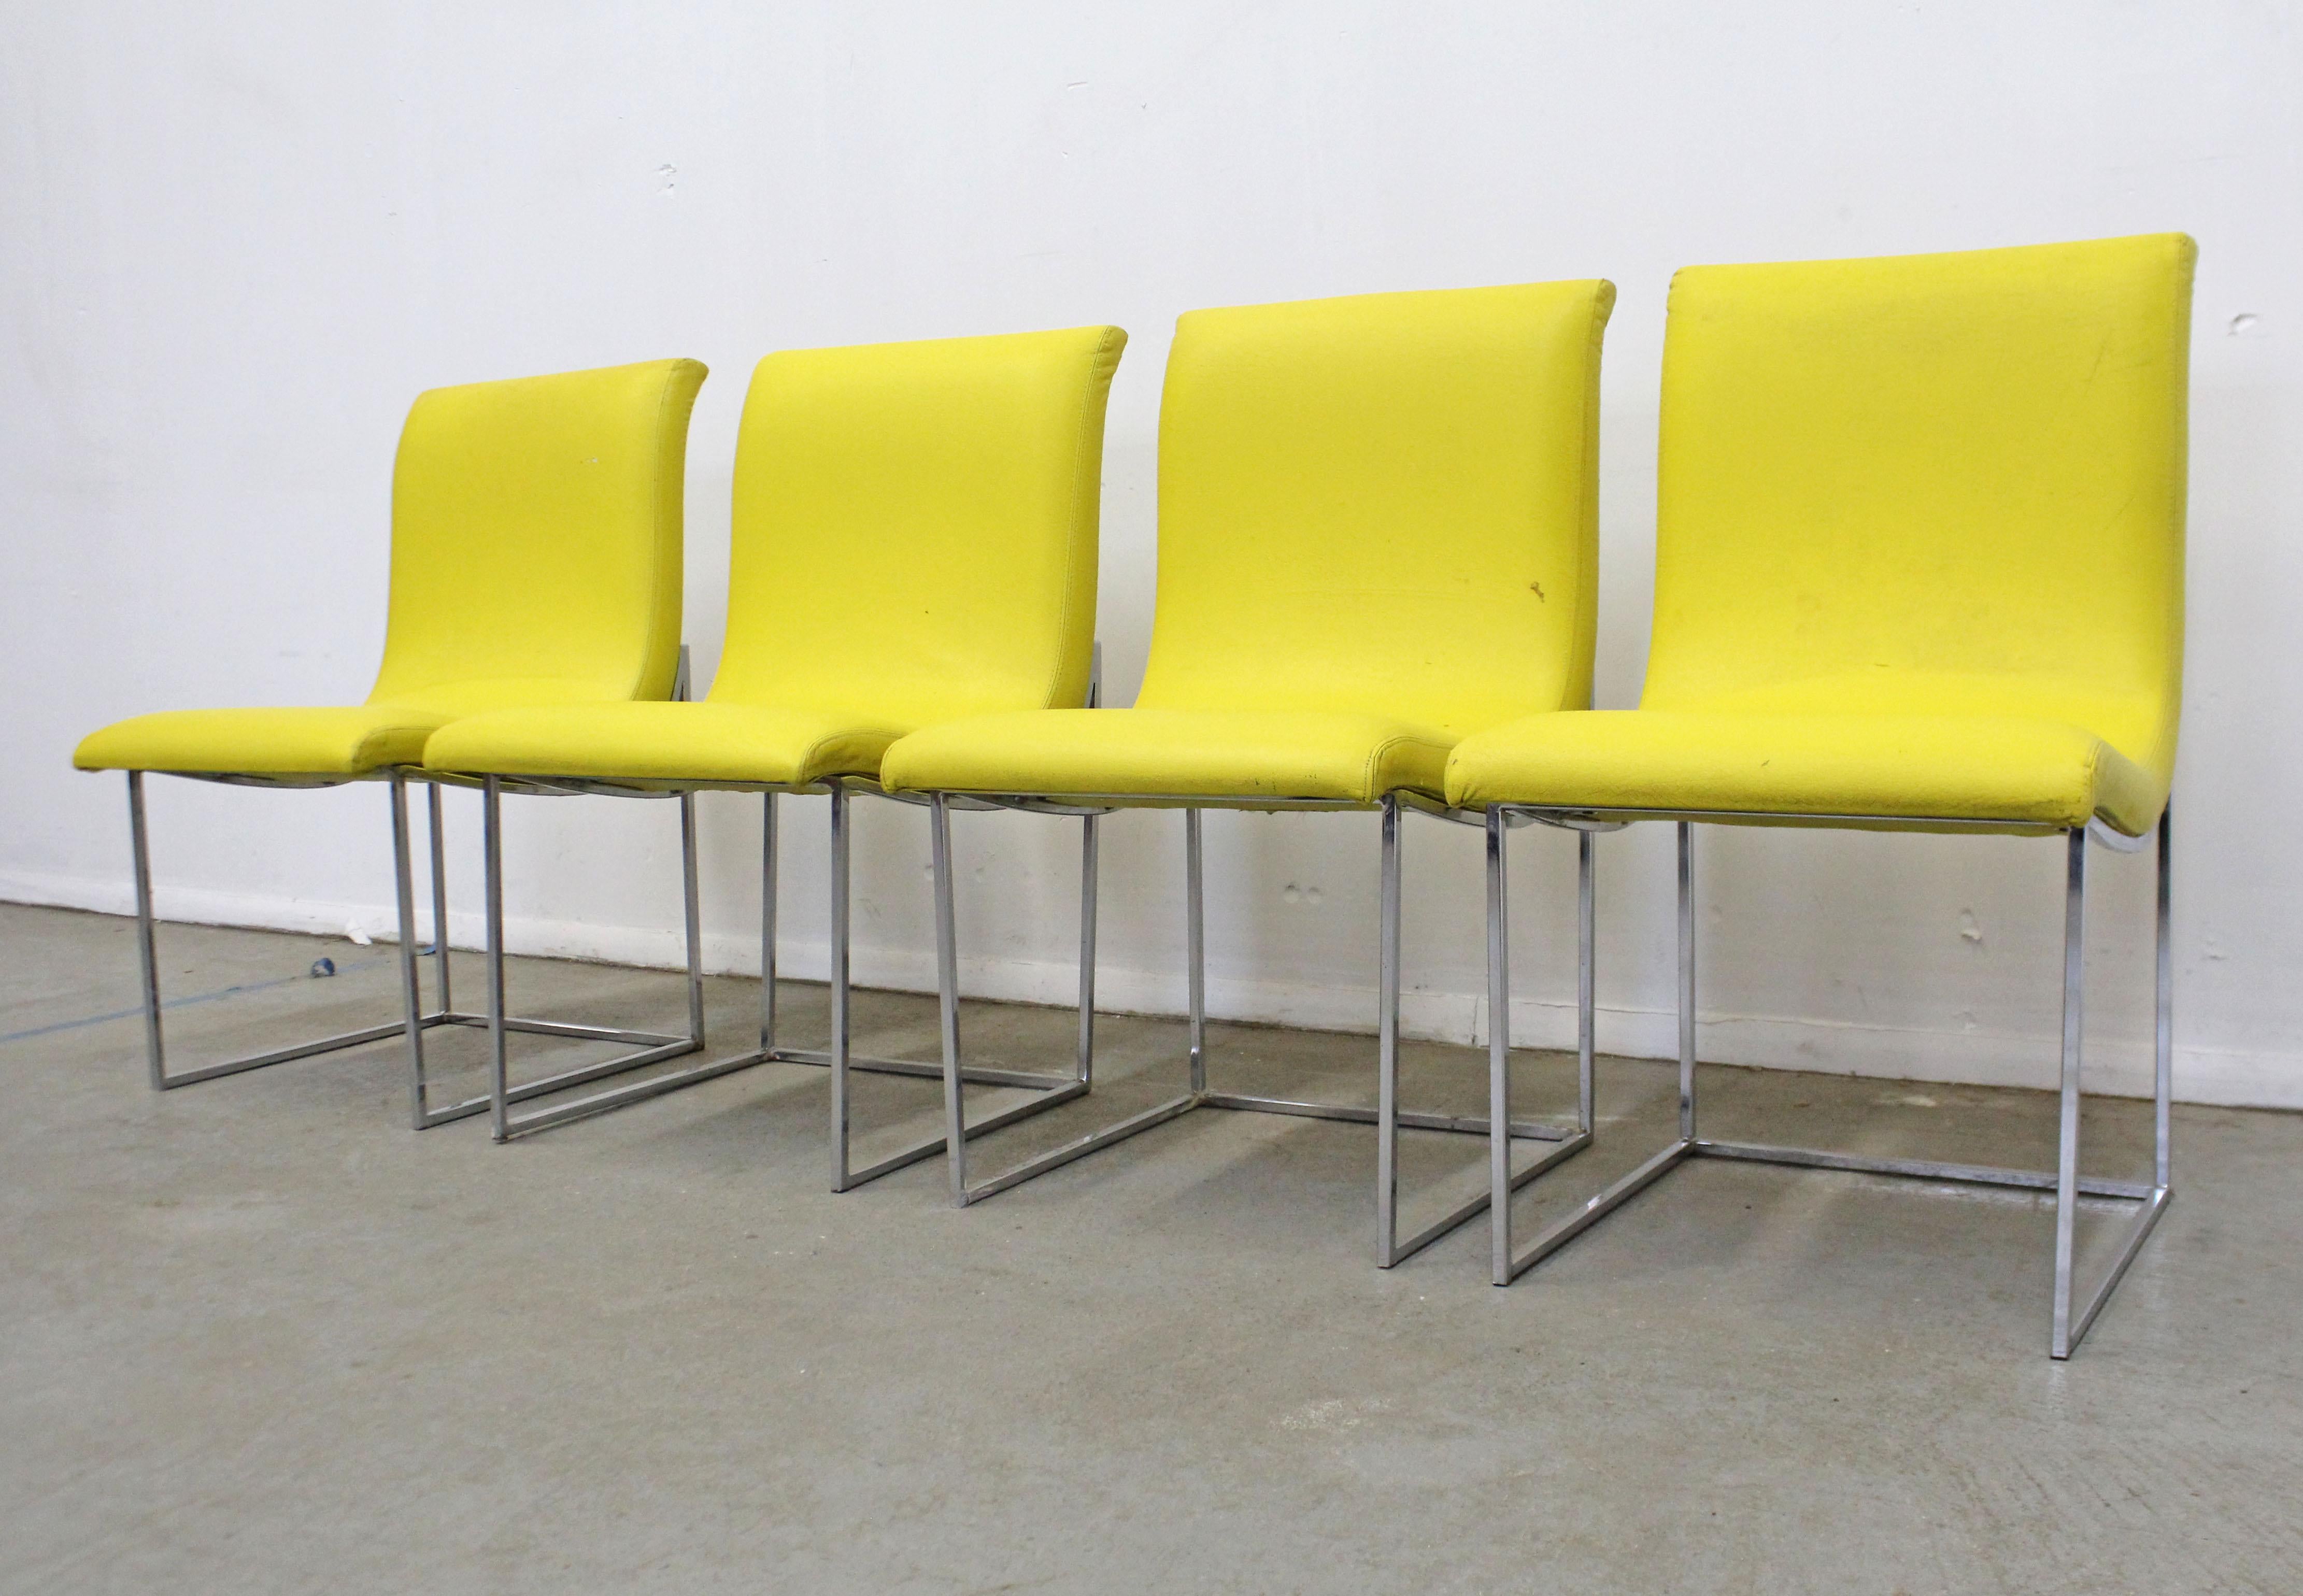 Offered is a very cool set of 4 Mid-Century Modern dining chairs designed by Milo Baughman for Thayer Coggin. Includes four side chairs made with chrome bases and yellow vinyl upholstery. They are in good vintage condition, showing some age wear